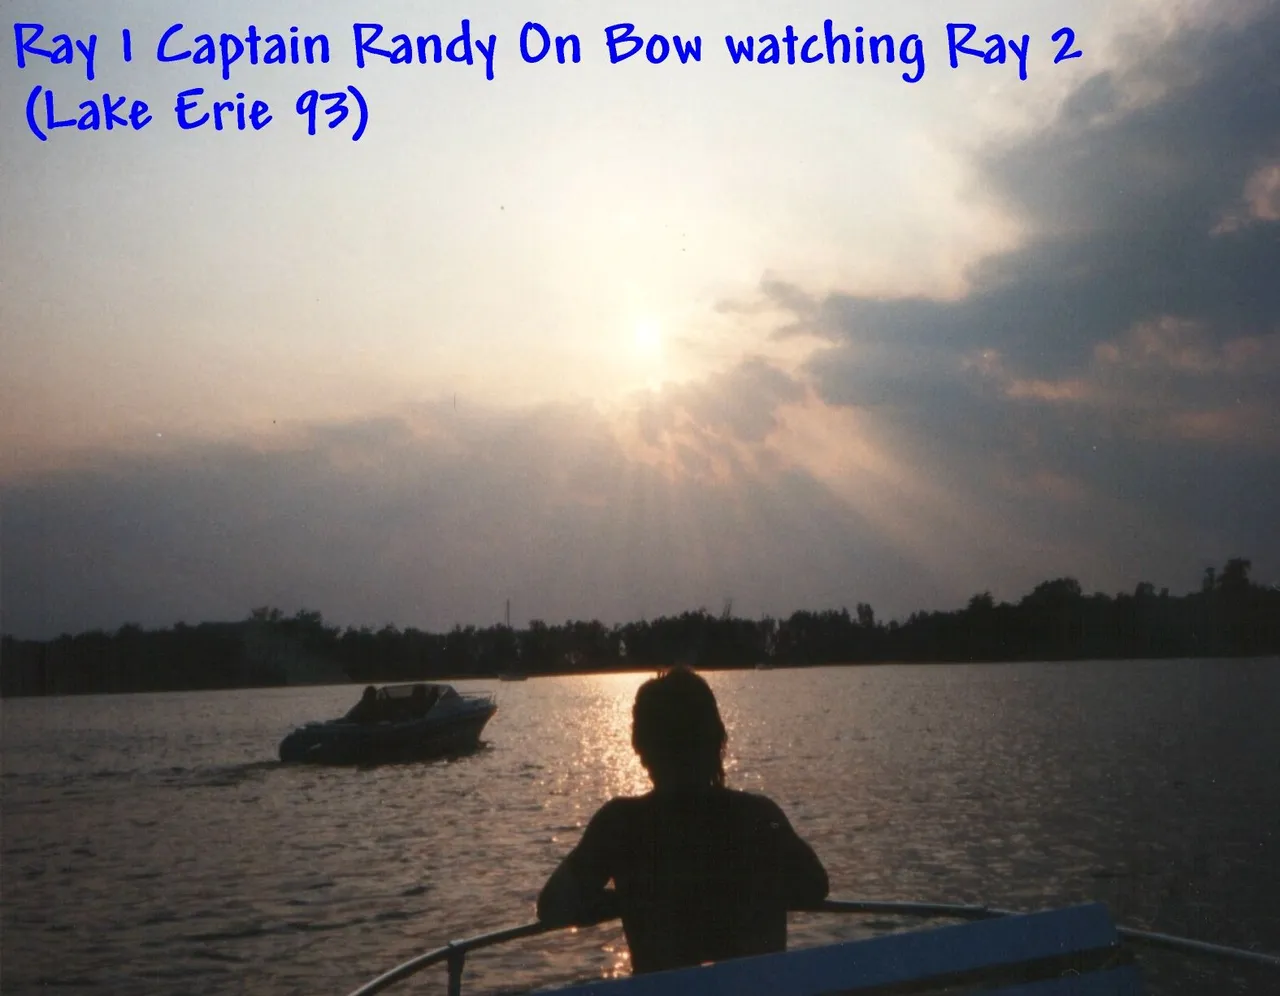 Ray 1 Captain Randy On Bow watching Ray 2 (Lake Erie 93).jpg